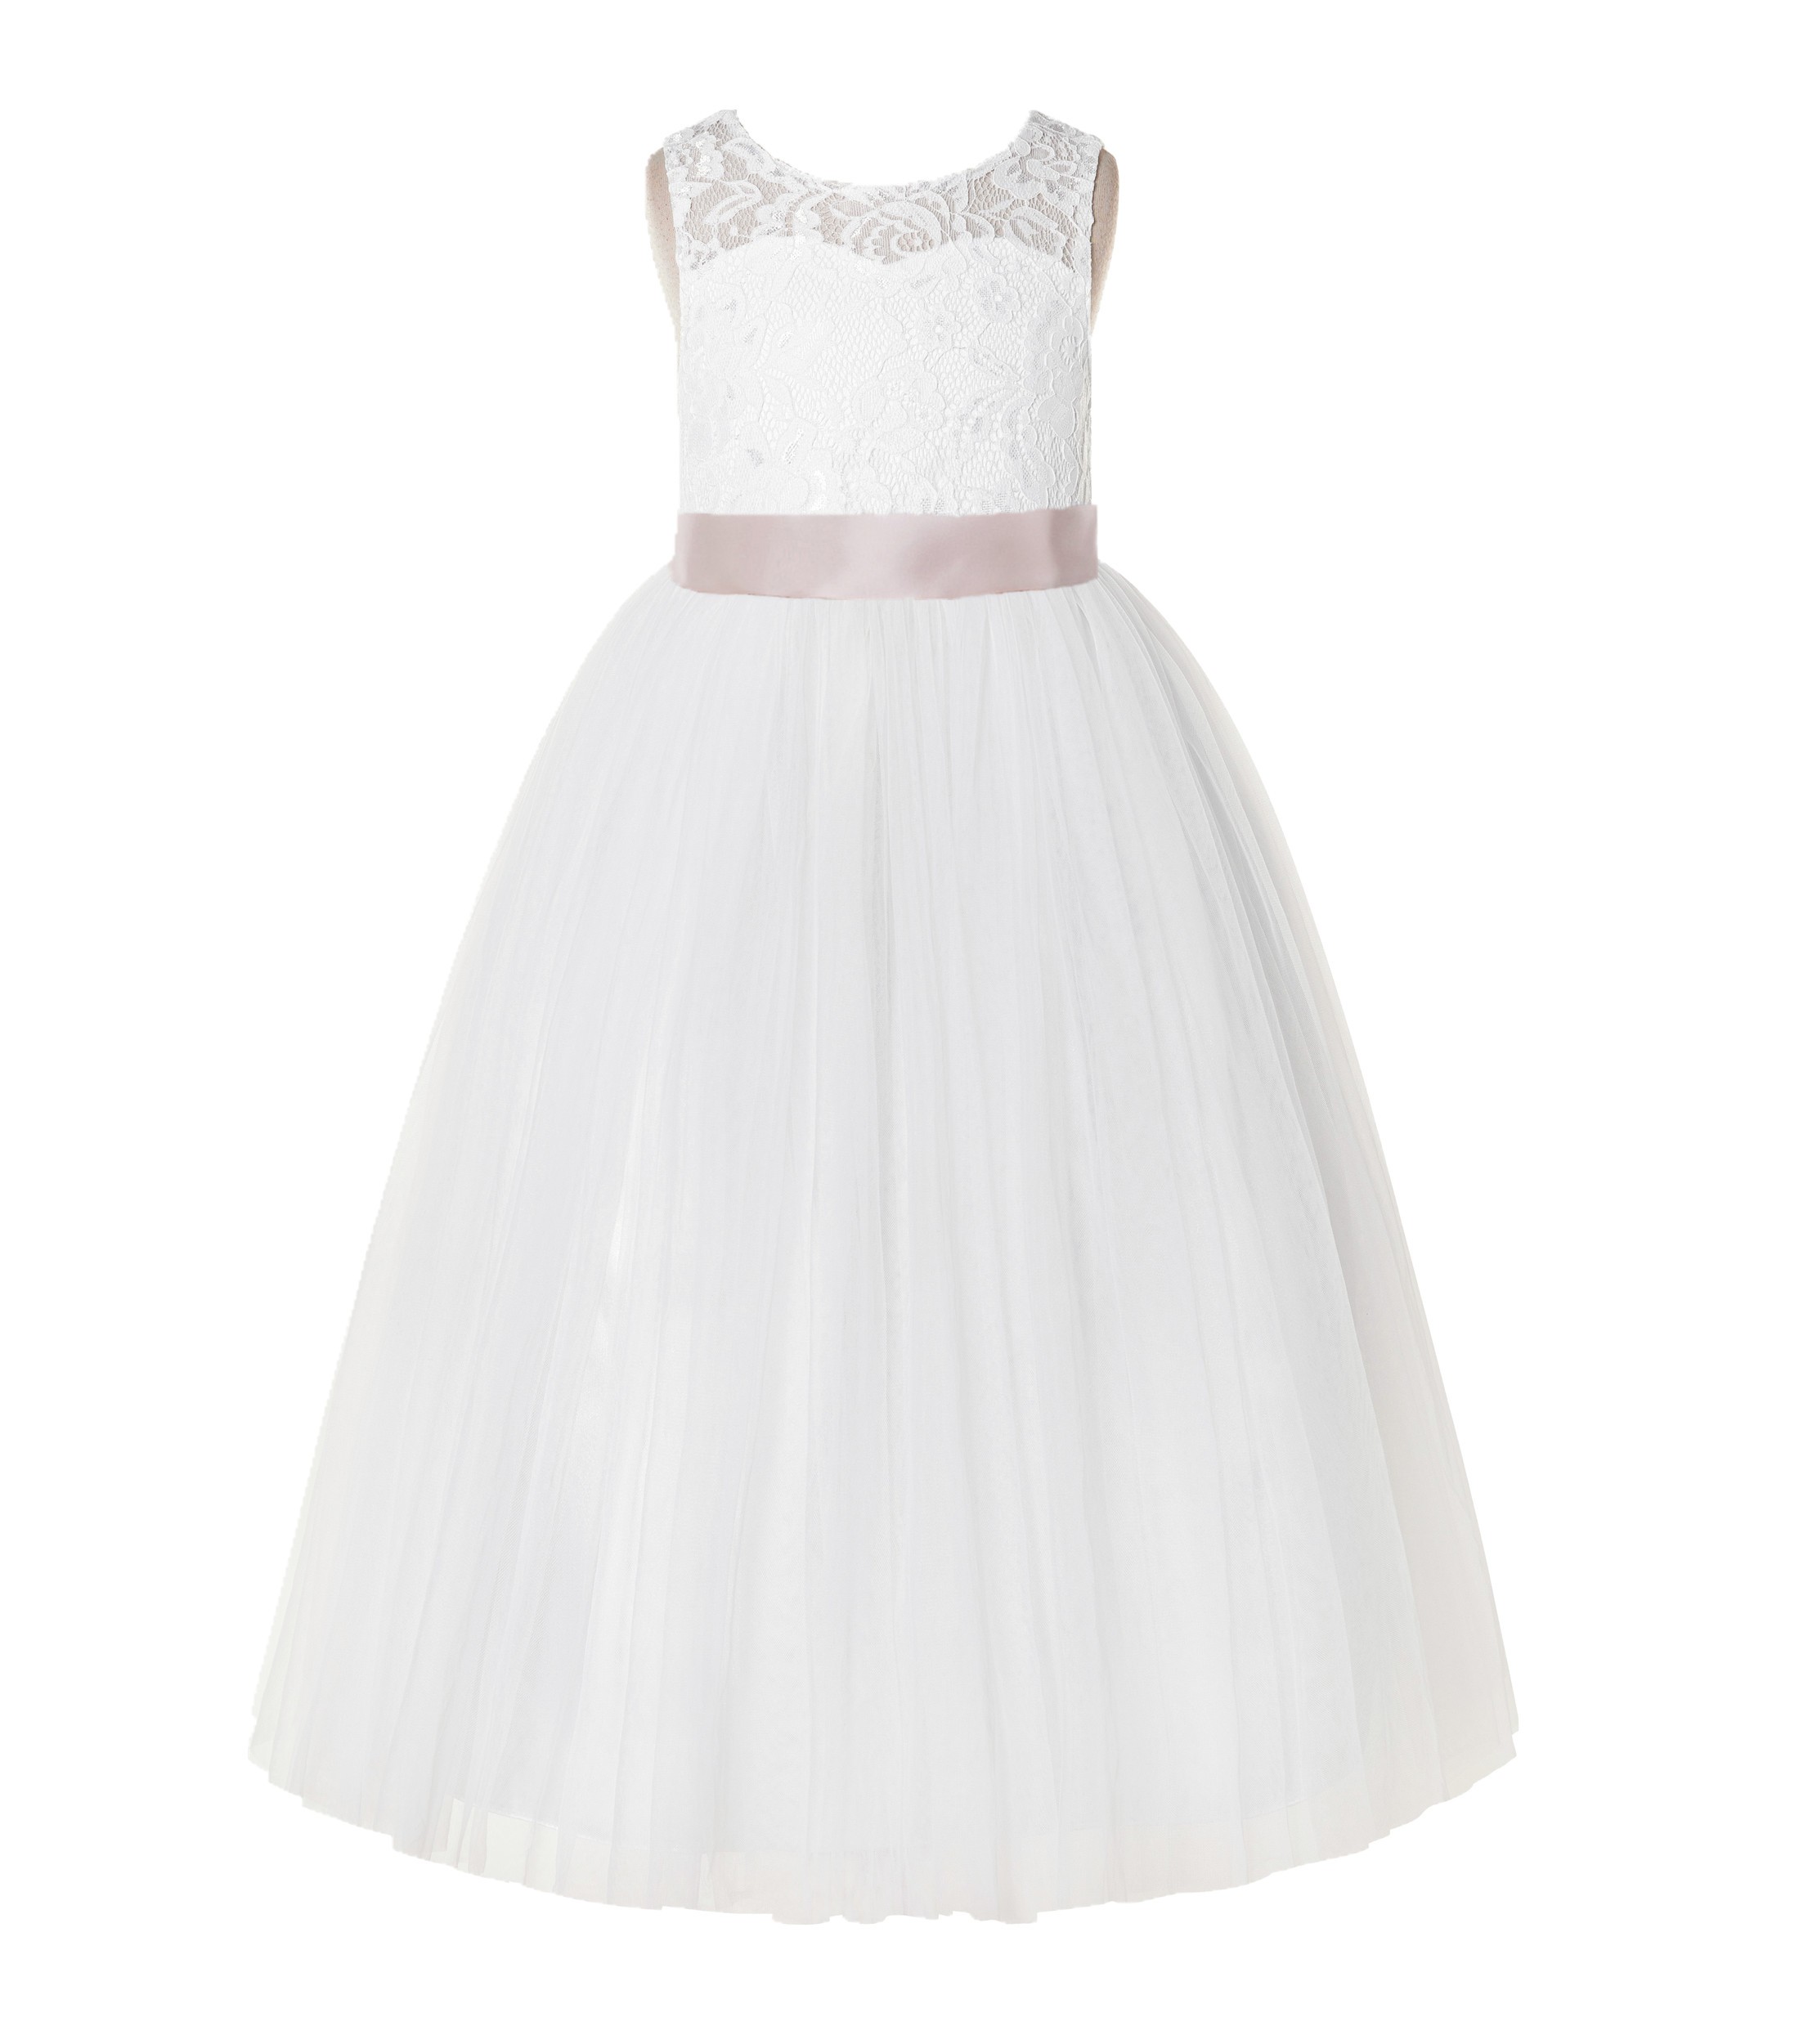 Ivory / Blush Pink Tulle A-Line Lace Flower Girl Dress 178